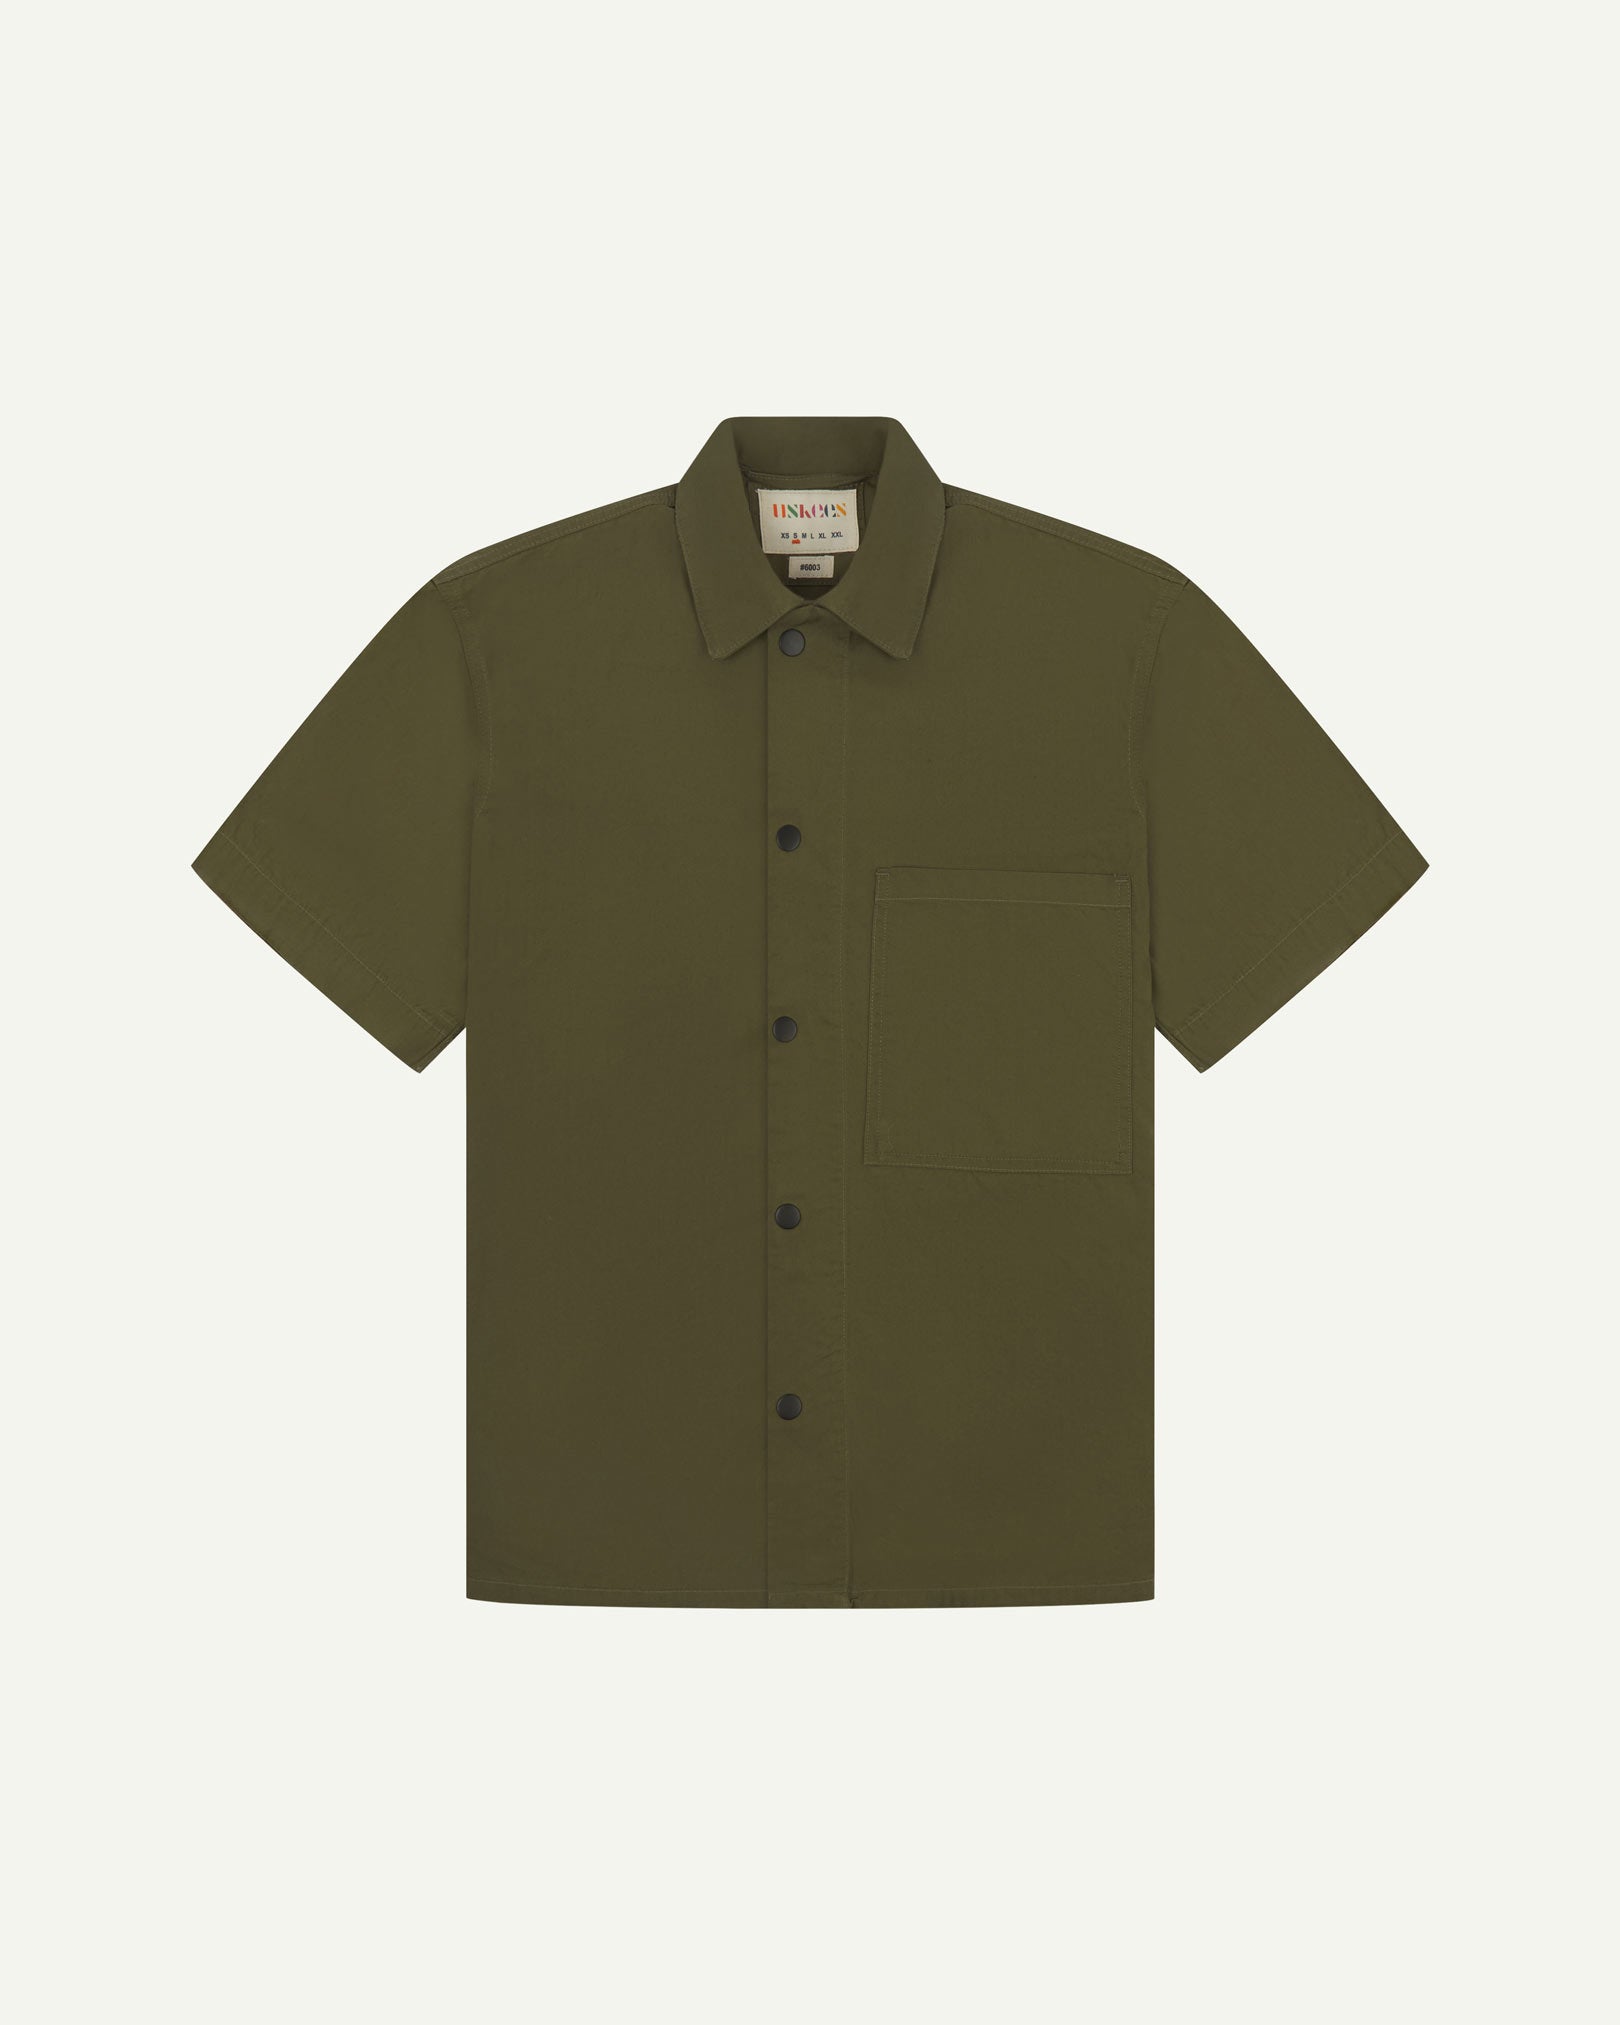 Front flat view of olive-green buttoned organic cotton lightweight short sleeve shirt from Uskees.